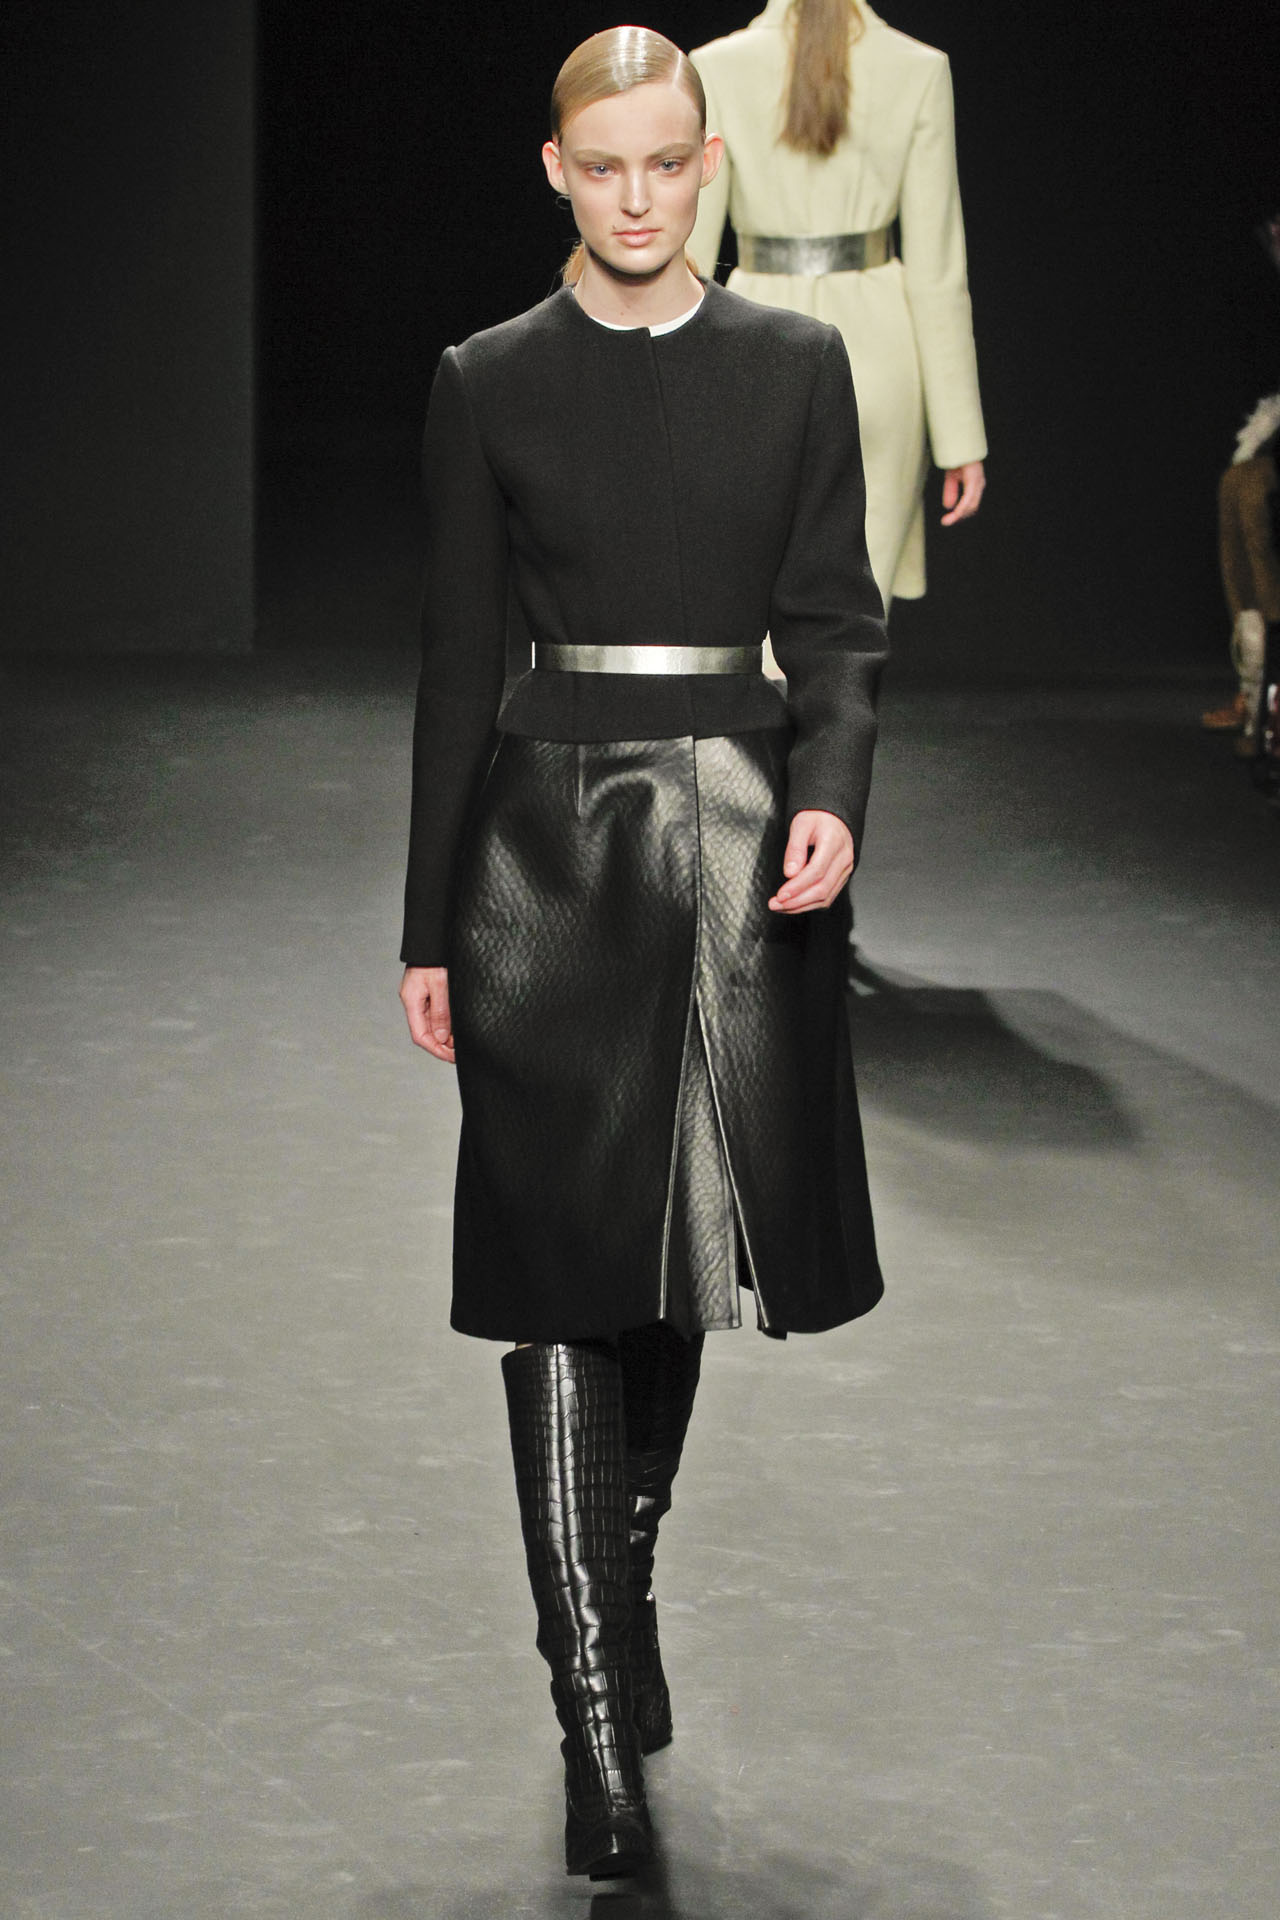 Image - Calvin Klein Fall Winter 2012 Black jacket and leather skirt ...